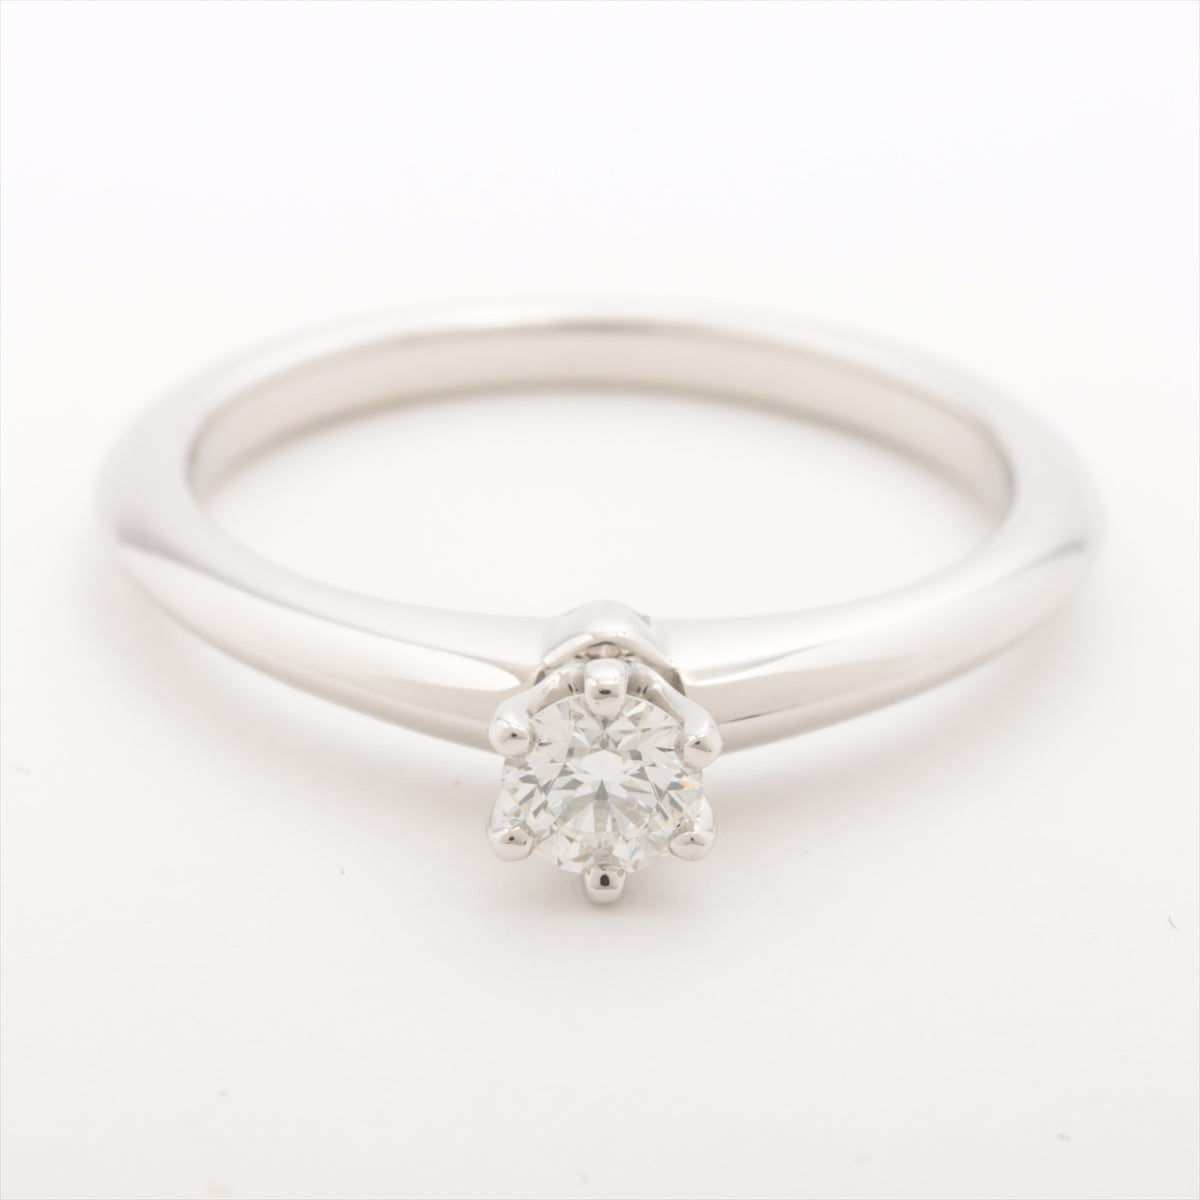 Tiffany Solitaire diamond rings Pt950 4.4g D0.22